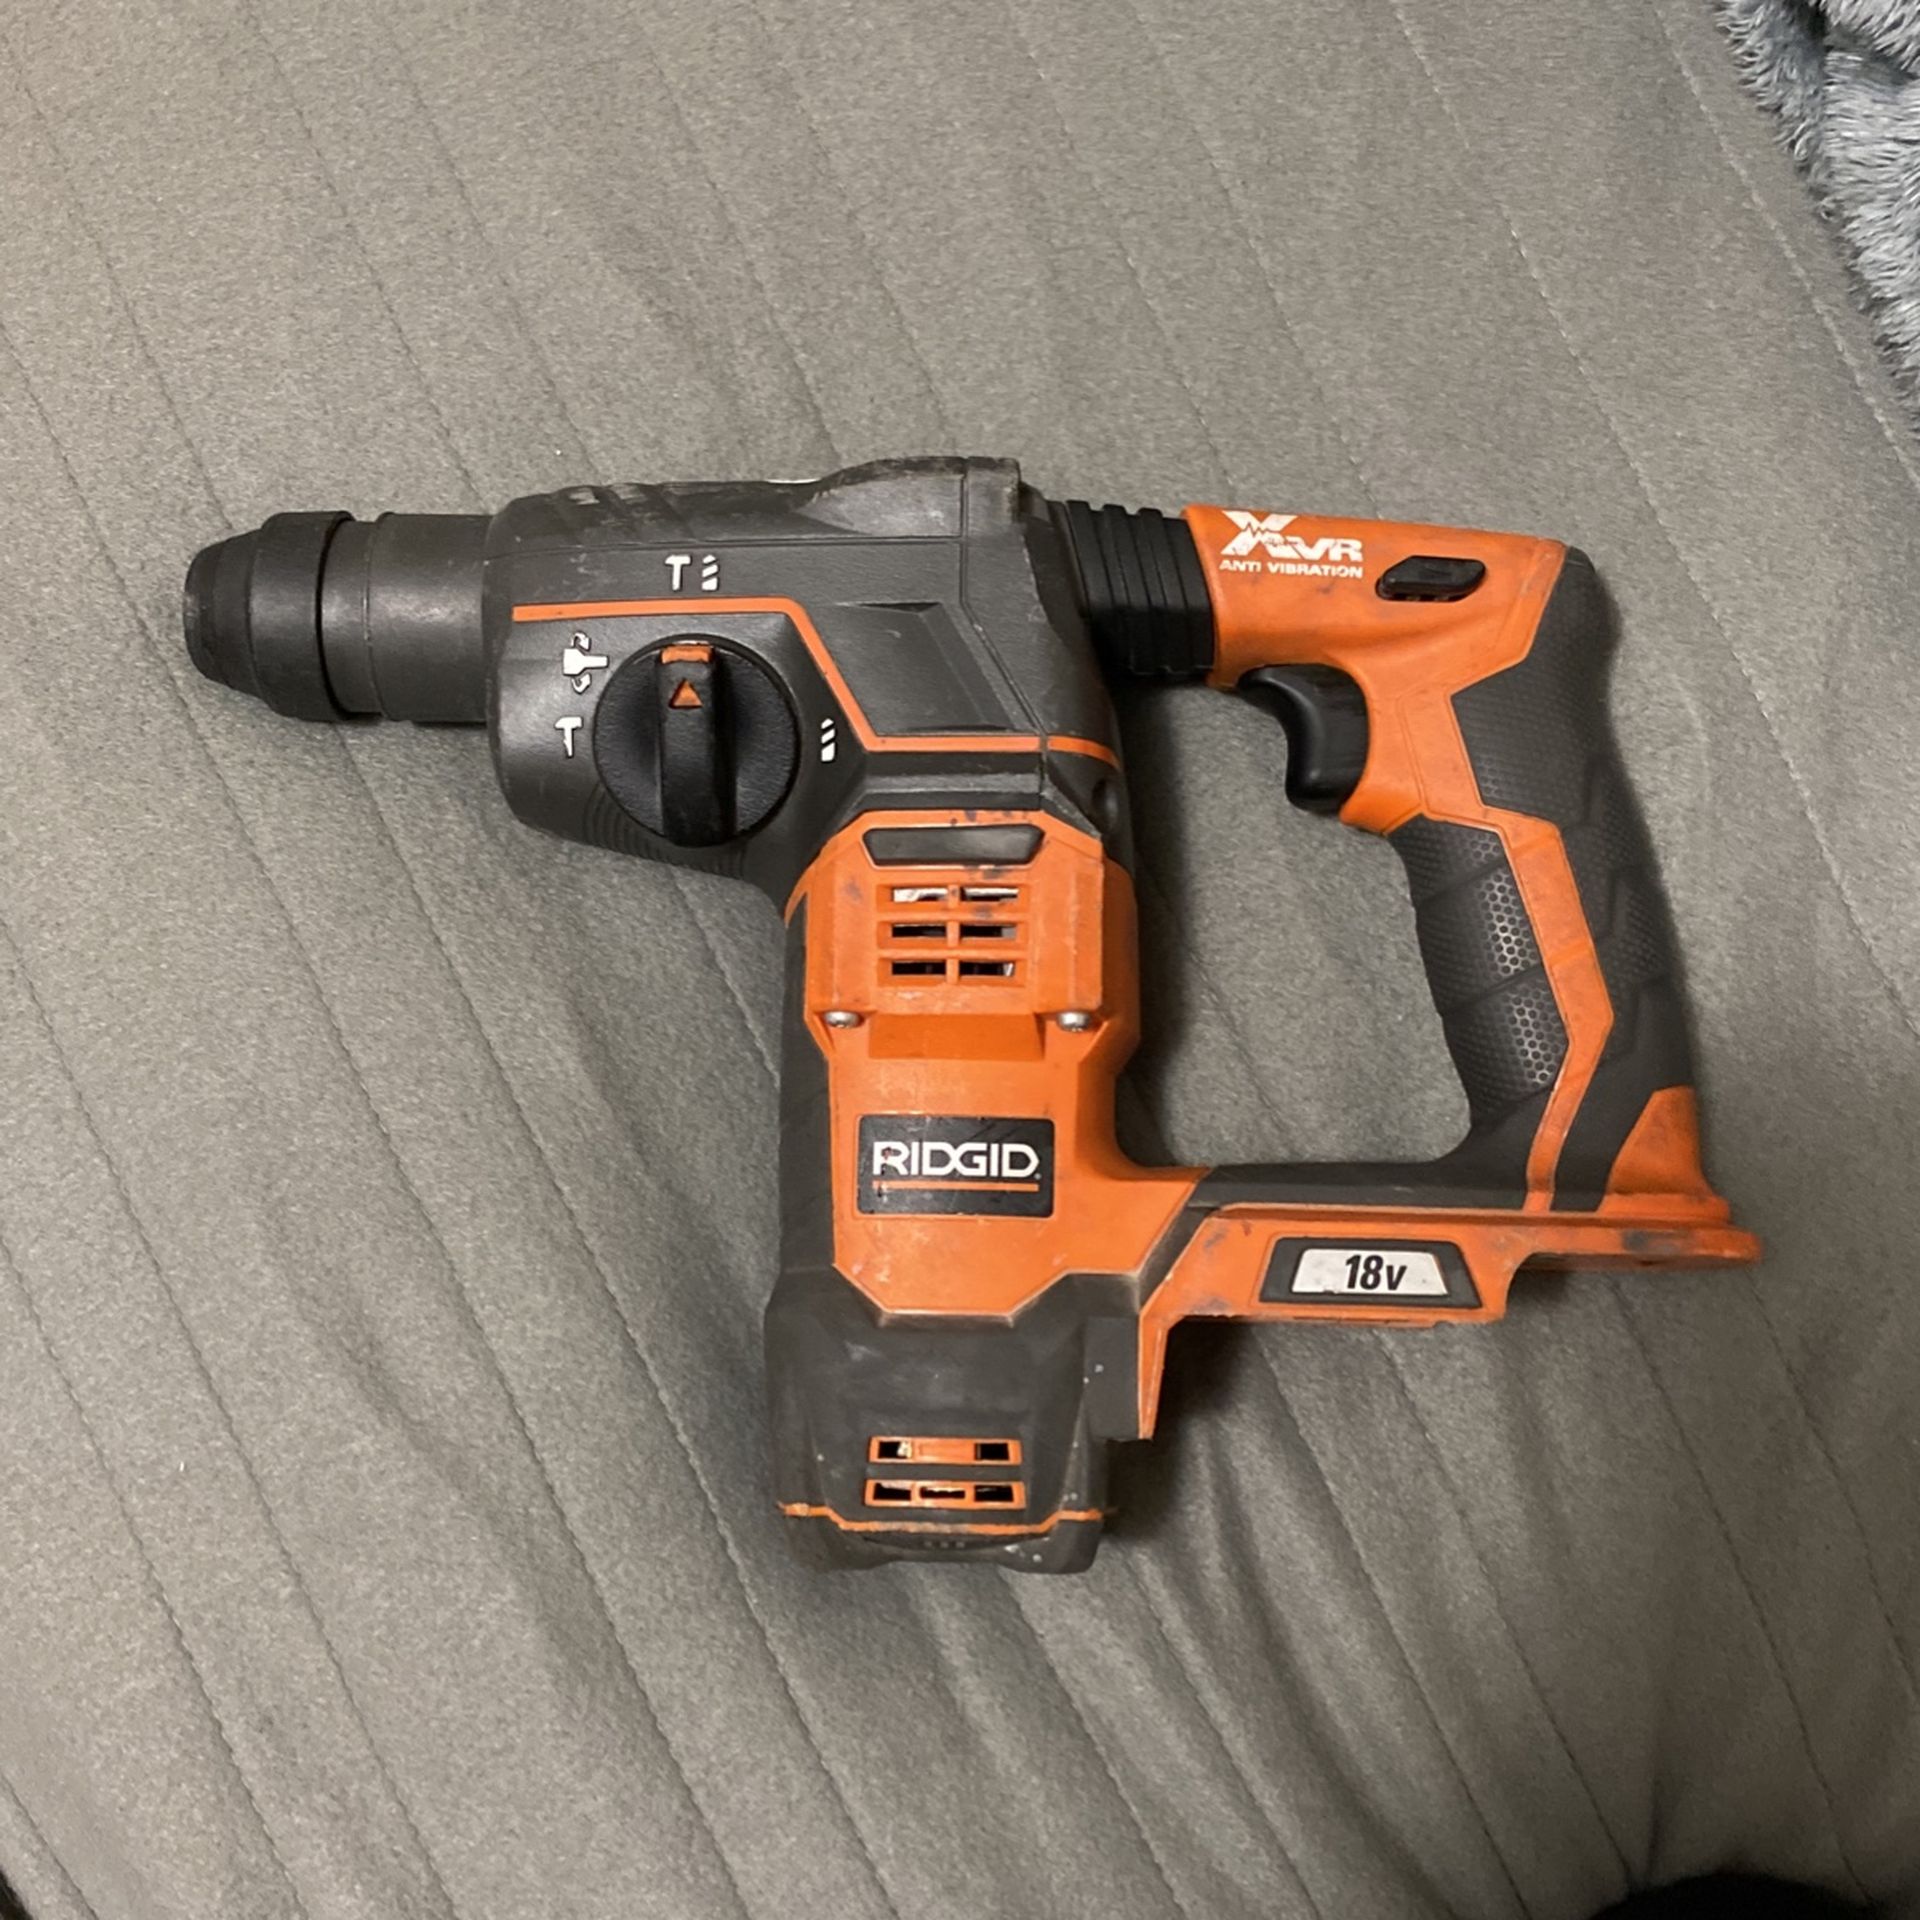 $120 Tool Only No Battery Tool Is Fully Operational I Have A Battery To Put In And Show It Works But I Use It For My Drills.